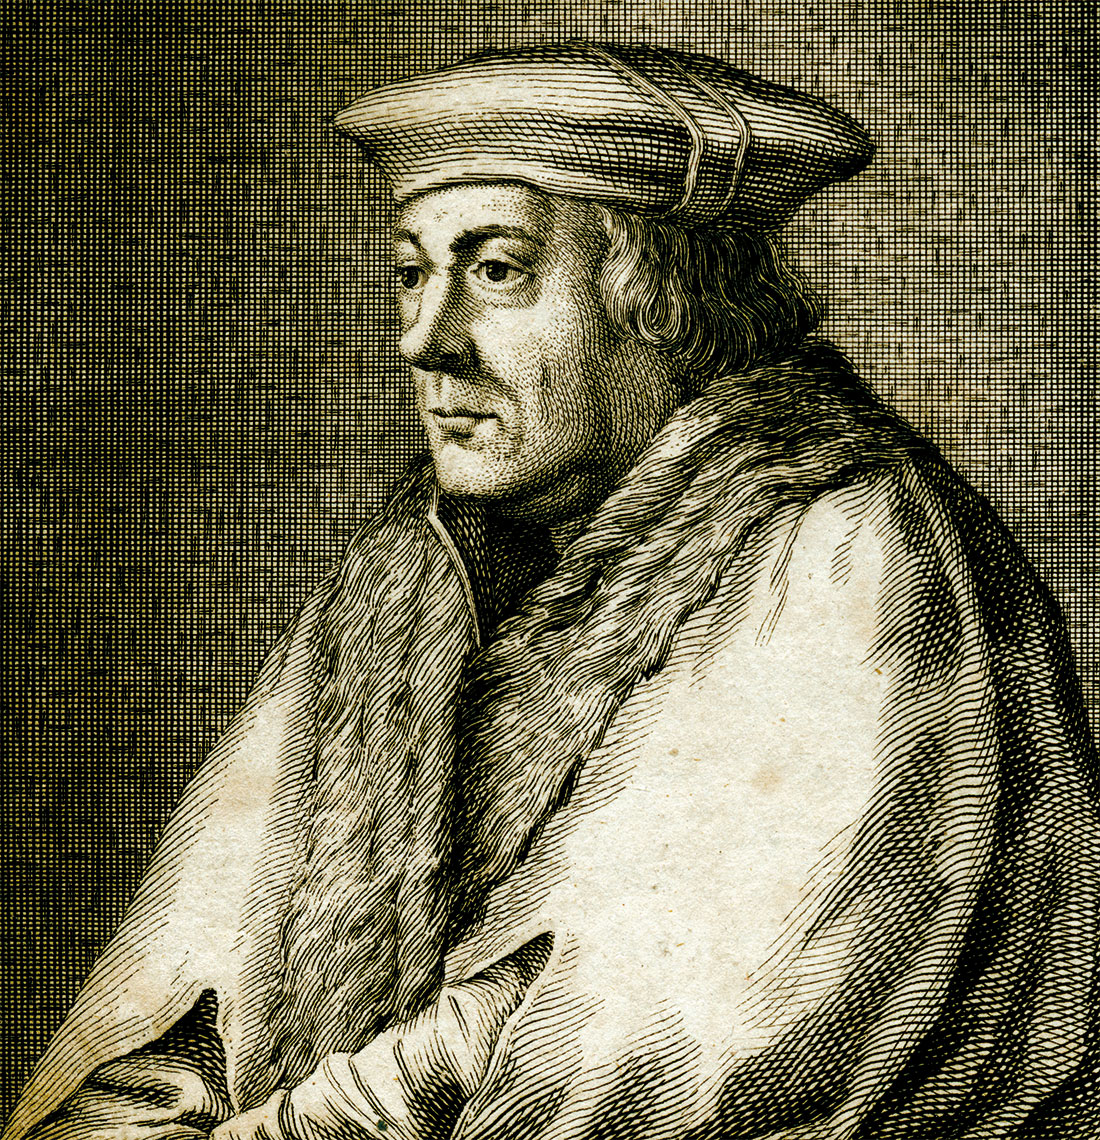 Brewer’s son: Thomas Cromwell, after Hans Holbein the Younger, engraving, 17th century.